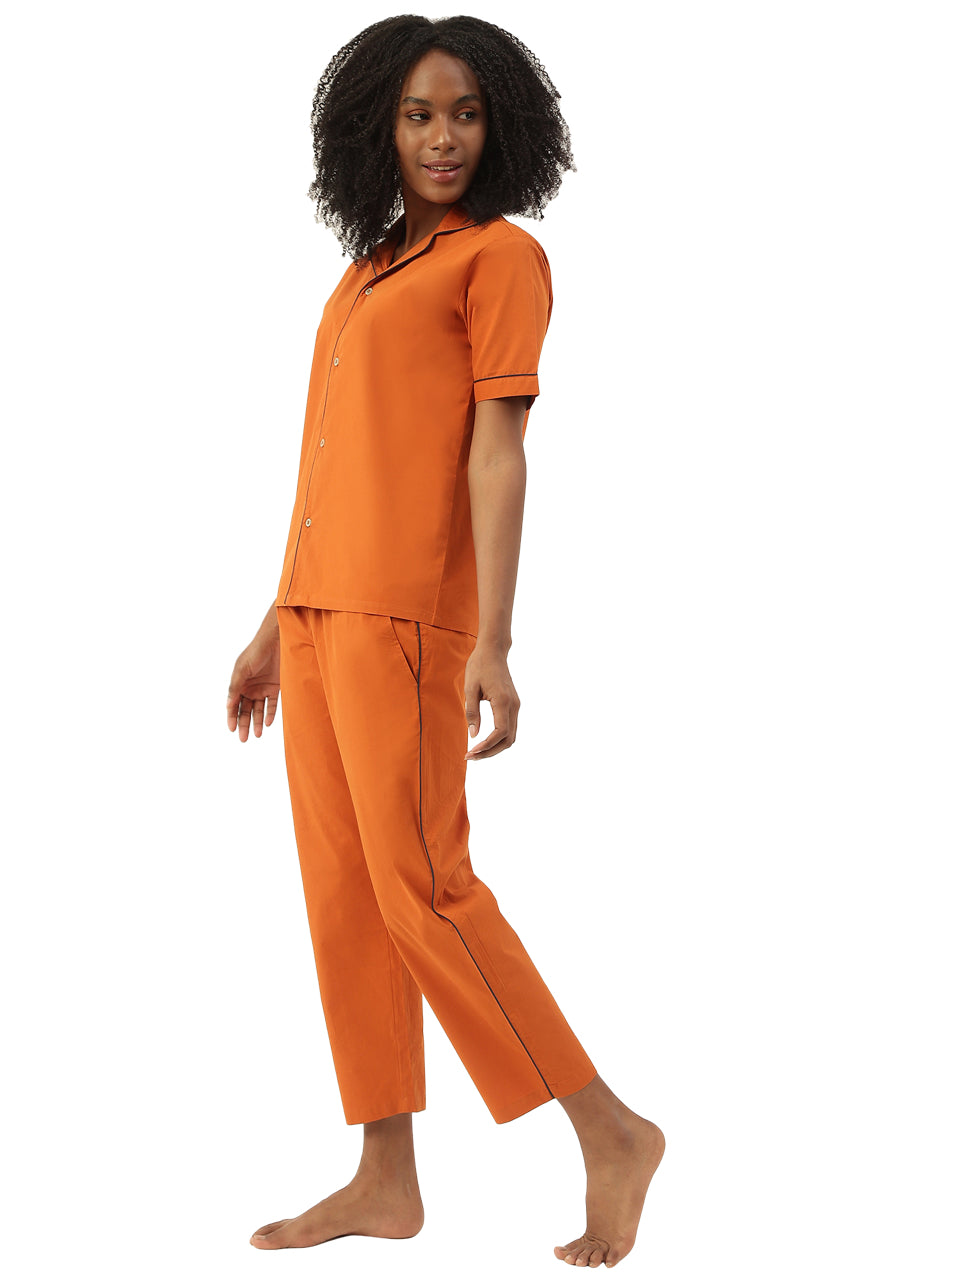 Women's Organic Cotton Solid Sleepsuit Set (Pack Of 1)